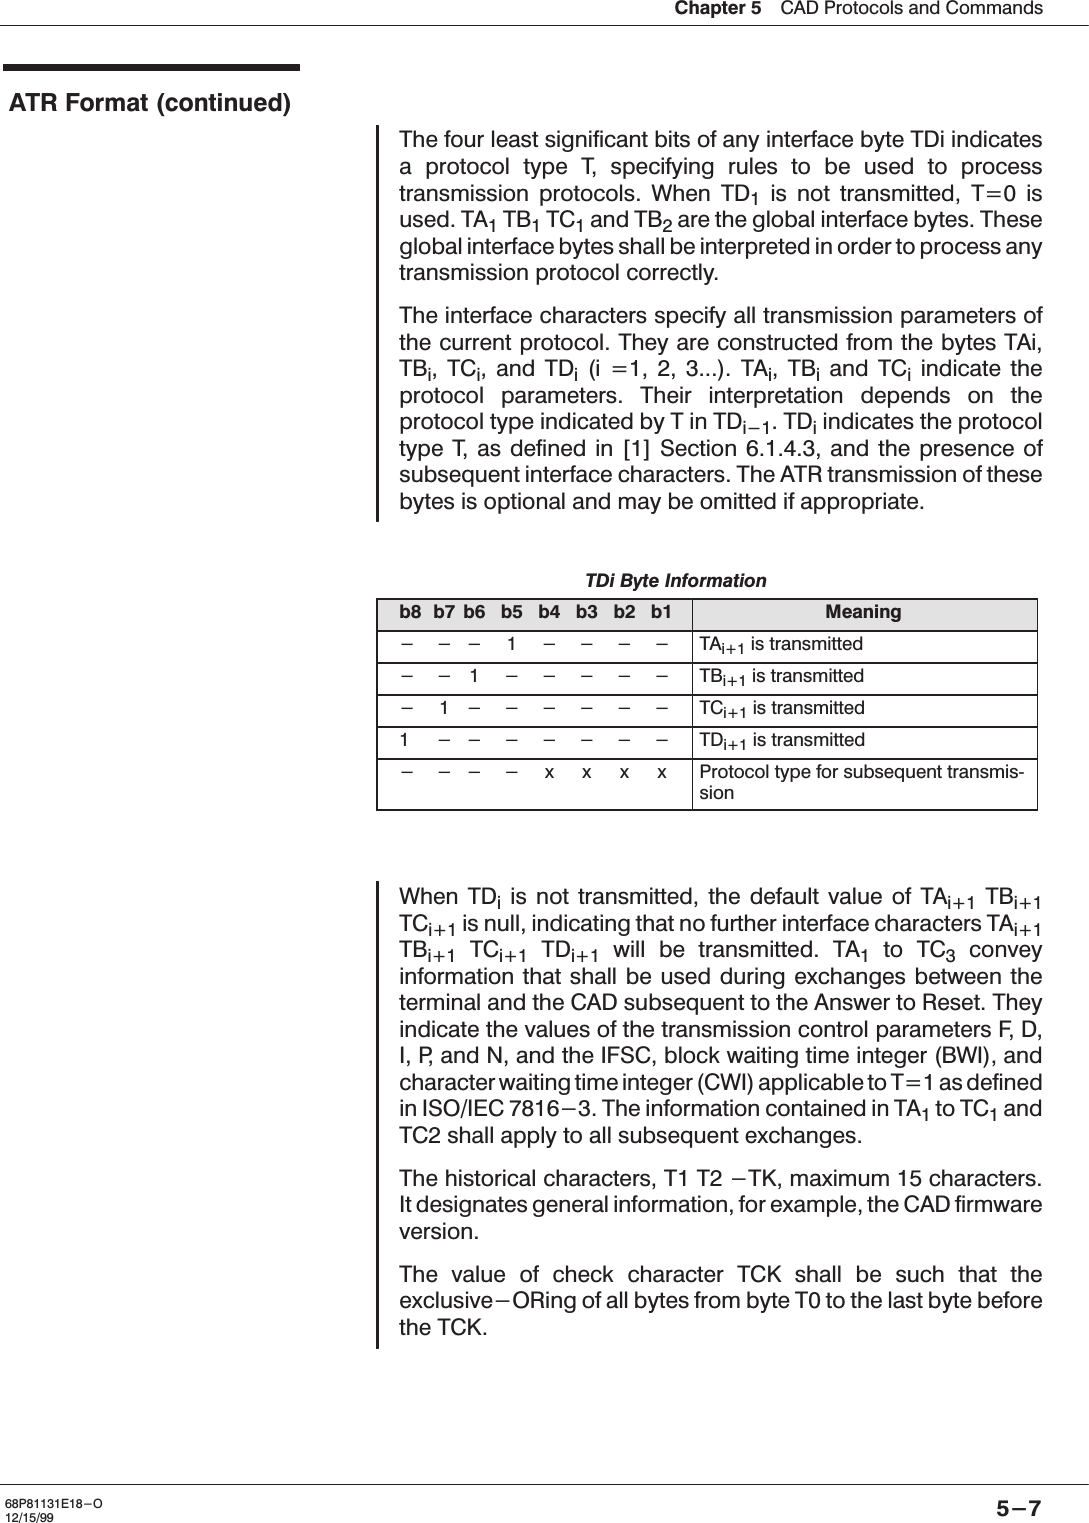 Chapter 5ąCAD Protocols and Commands5-768P81131E18-O12/15/99ATR Format (continued)The four least significant bits of any interface byte TDi indicatesa protocol type T, specifying rules to be used to processtransmission protocols. When TD1is not transmitted, T=0 isused. TA1TB1TC1and TB2are the global interface bytes. Theseglobal interface bytes shall be interpreted in order to process anytransmission protocol correctly.The interface characters specify all transmission parameters ofthe current protocol. They are constructed from the bytes TAi,TBi,TCi, and TDi(i =1, 2, 3...). TAi,TBiand TCiindicate theprotocol parameters. Their interpretation depends on theprotocol type indicated by T in TDi-1.TDiindicates the protocoltype T, as defined in [1] Section 6.1.4.3, and the presence ofsubsequent interface characters. The ATR transmission of thesebytes is optional and may be omitted if appropriate.TDi Byte Informationb8 b7 b6 b5 b4 b3 b2 b1 Meaning--- 1 ---- TAi+1 is transmitted--1 ----- TBi+1 is transmitted- 1------ TCi+1 is transmitted1 ------- TDi+1 is transmitted----xxxx Protocol type for subsequent transmisĆsionWhen TDiis not transmitted, the default value of TAi+1 TBi+1TCi+1 is null, indicating that no further interface characters TAi+1TBi+1 TCi+1 TDi+1 will be transmitted. TA1to TC3conveyinformation that shall be used during exchanges between theterminal and the CAD subsequent to the Answer to Reset. Theyindicate the values of the transmission control parameters F, D,I, P, and N, and the IFSC, block waiting time integer (BWI), andcharacter waiting time integer (CWI) applicable to T=1 as definedin ISO/IEC 7816-3. The information contained in TA1to TC1andTC2 shall apply to all subsequent exchanges.The historical characters, T1 T2 -TK, maximum 15 characters.It designates general information, for example, the CAD firmwareversion.The value of check character TCK shall be such that theexclusive-ORing of all bytes from byte T0 to the last byte beforethe TCK.